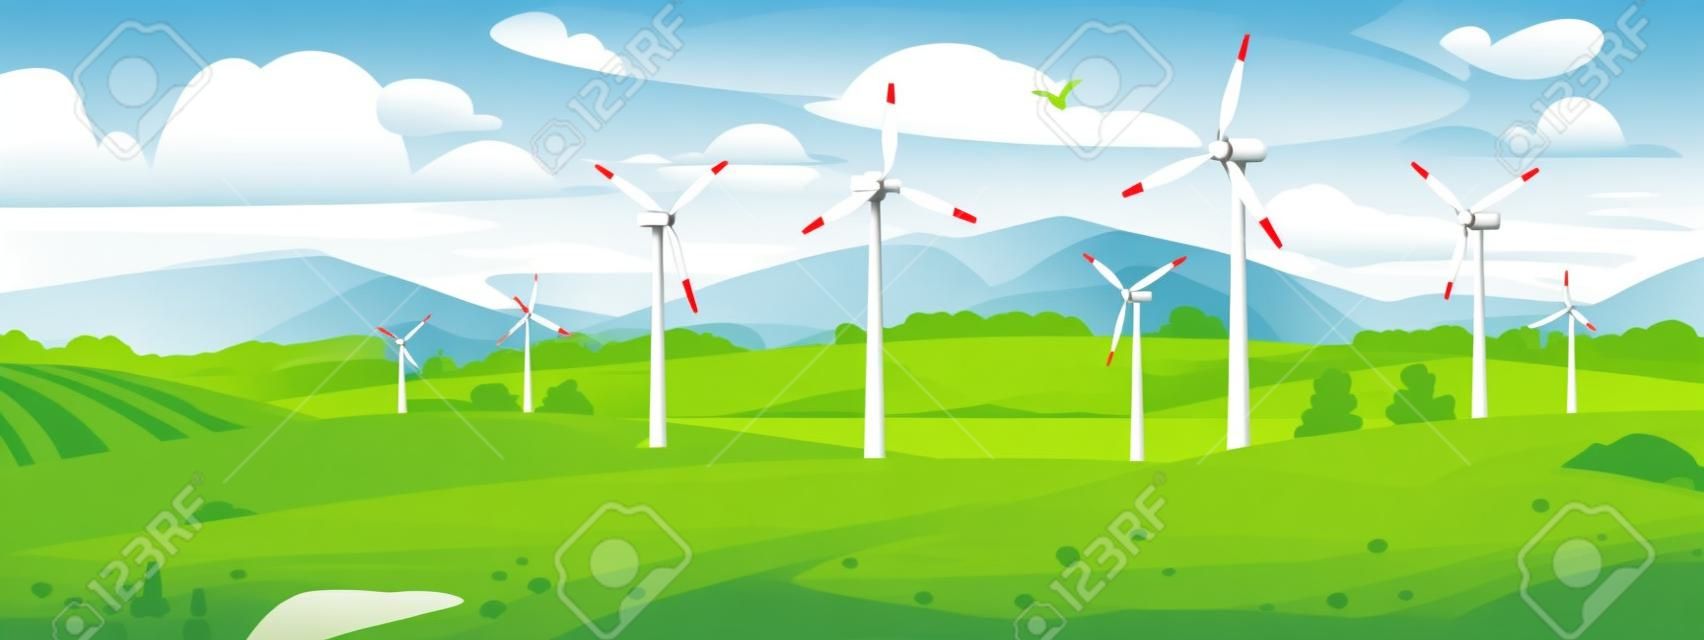 A wind farm or power plant in the field near the lake and mountains in summer. Wind turbines of a power station generate eco-friendly and sustainable electricity. Cartoon style vector illustration.